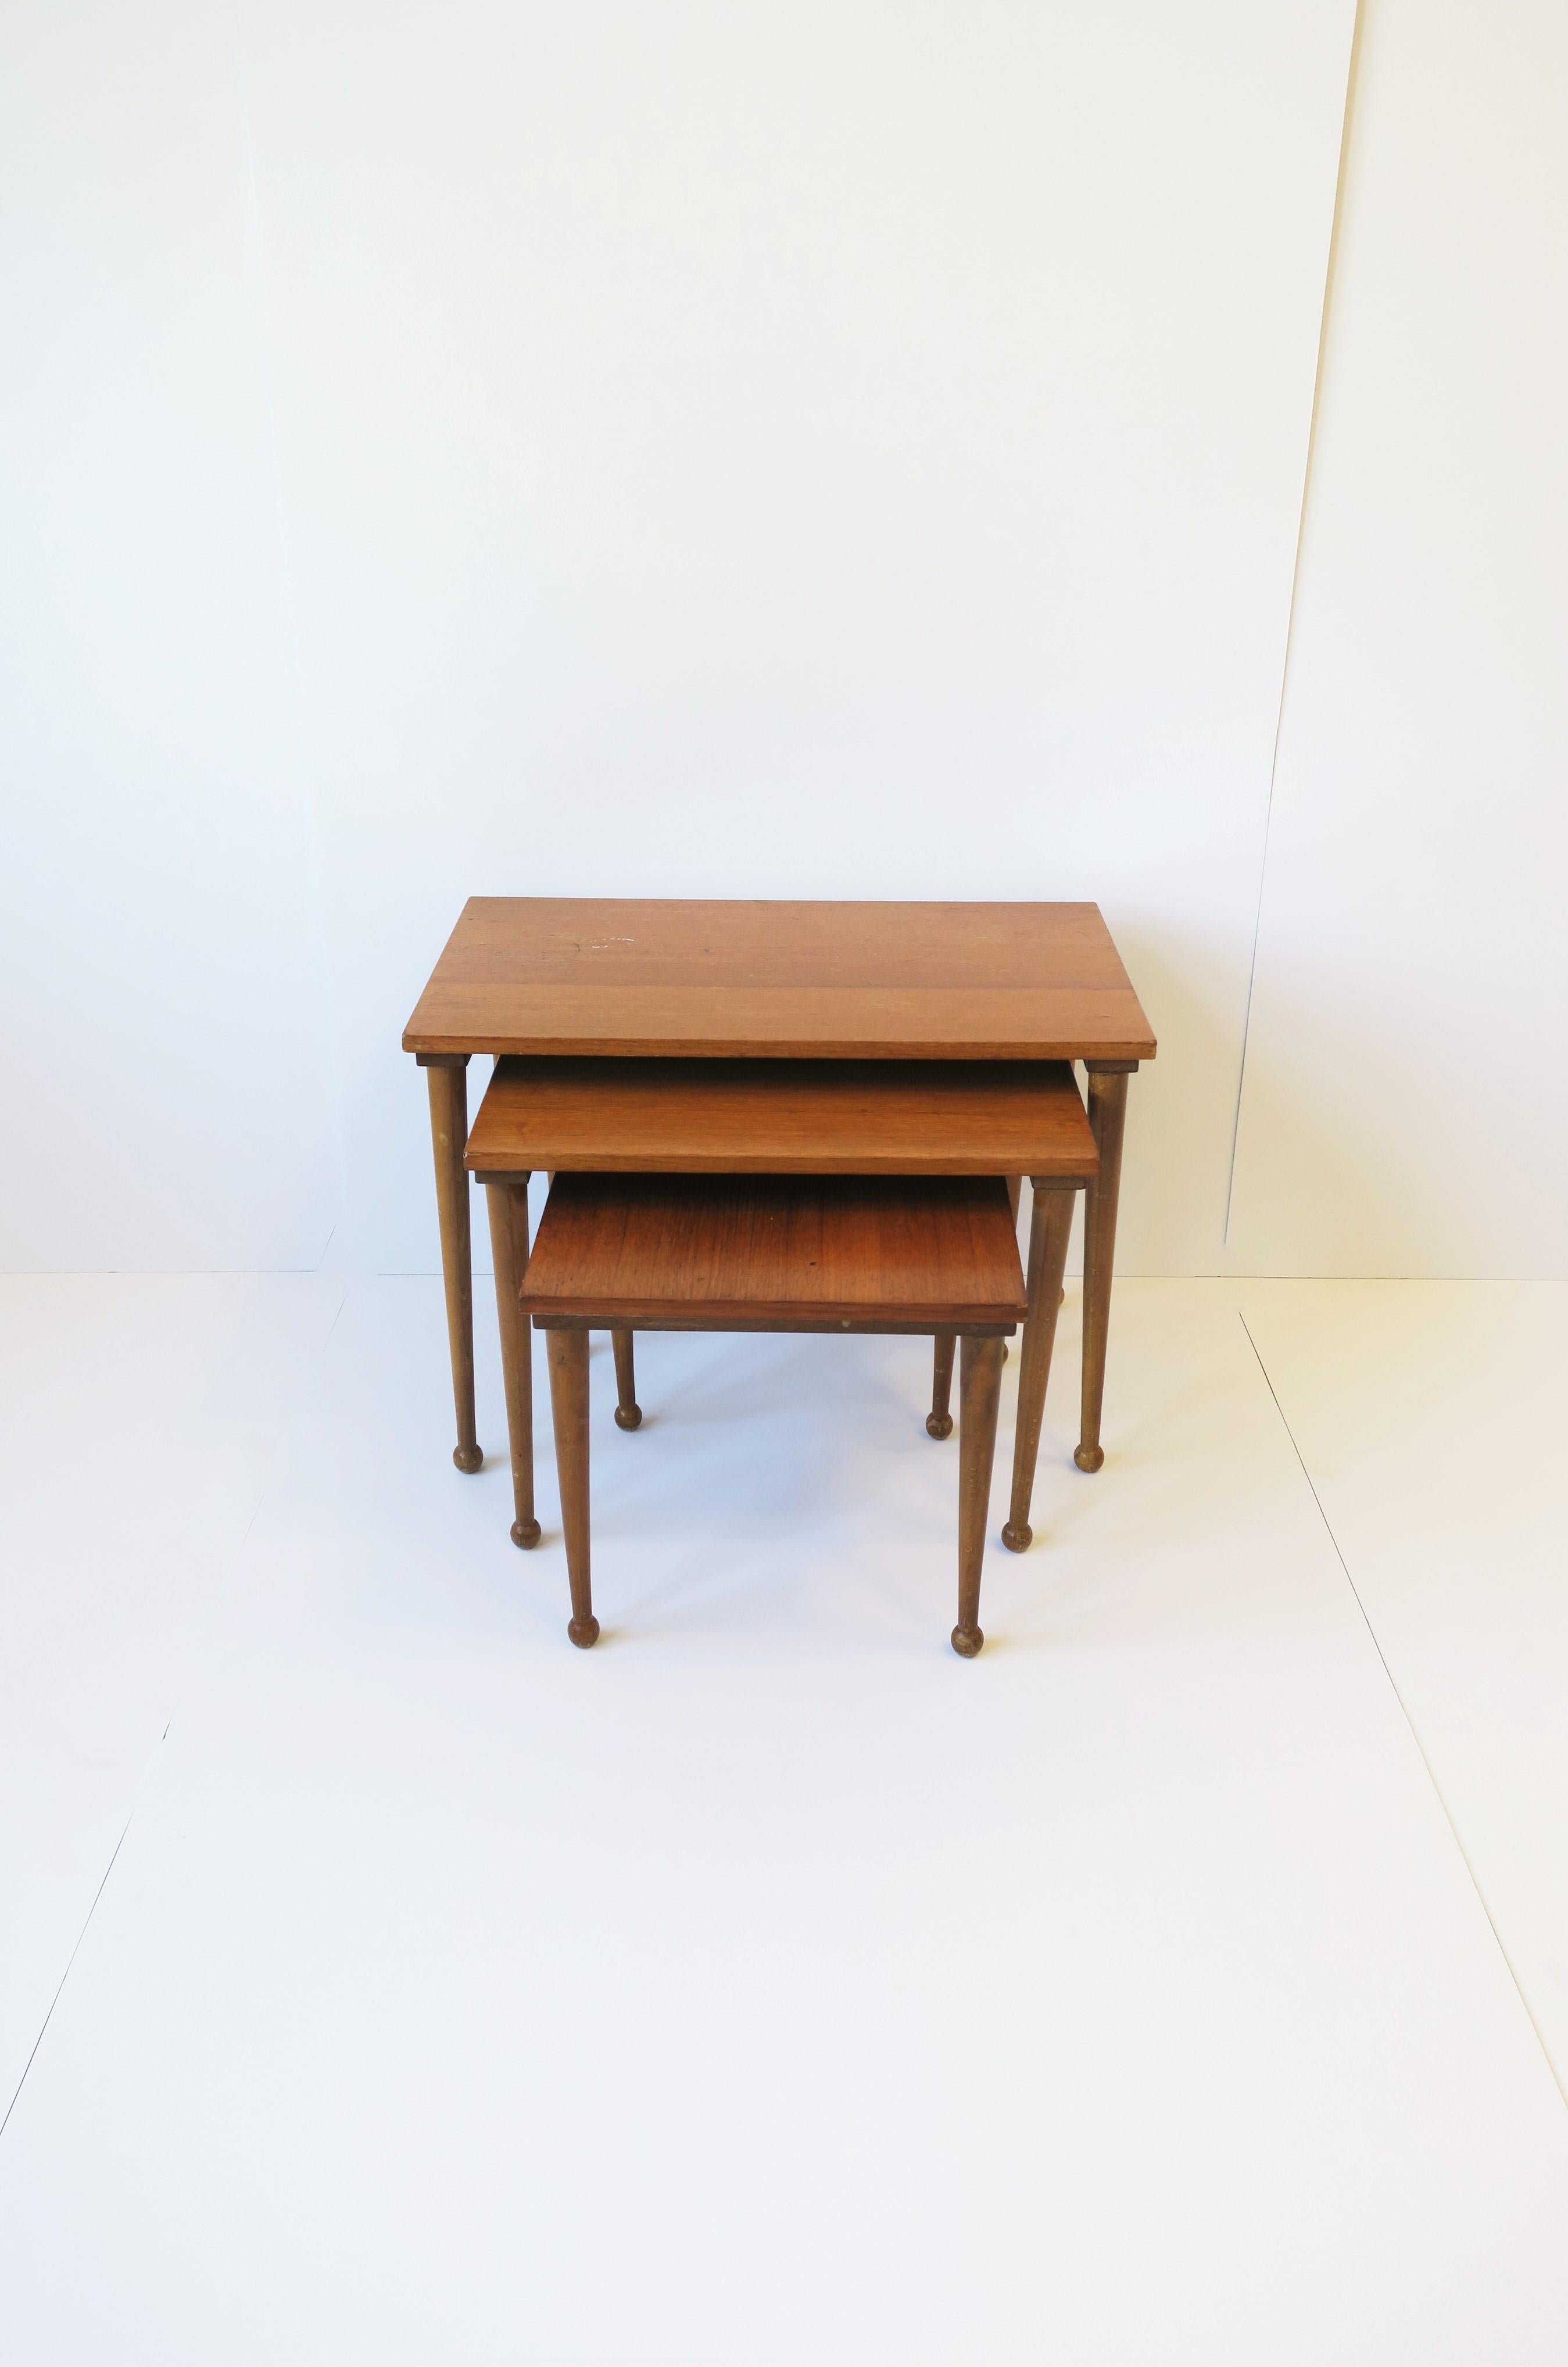 A set of three (3) Scandinavian Modern nesting tables, circa mid-20th century, 1960s, Scandinavia. A great set as an end, side and drinks tables. Tables are well made with nice legs. Wood is honey brown. Tables are a convenient size. 

Dimensions: